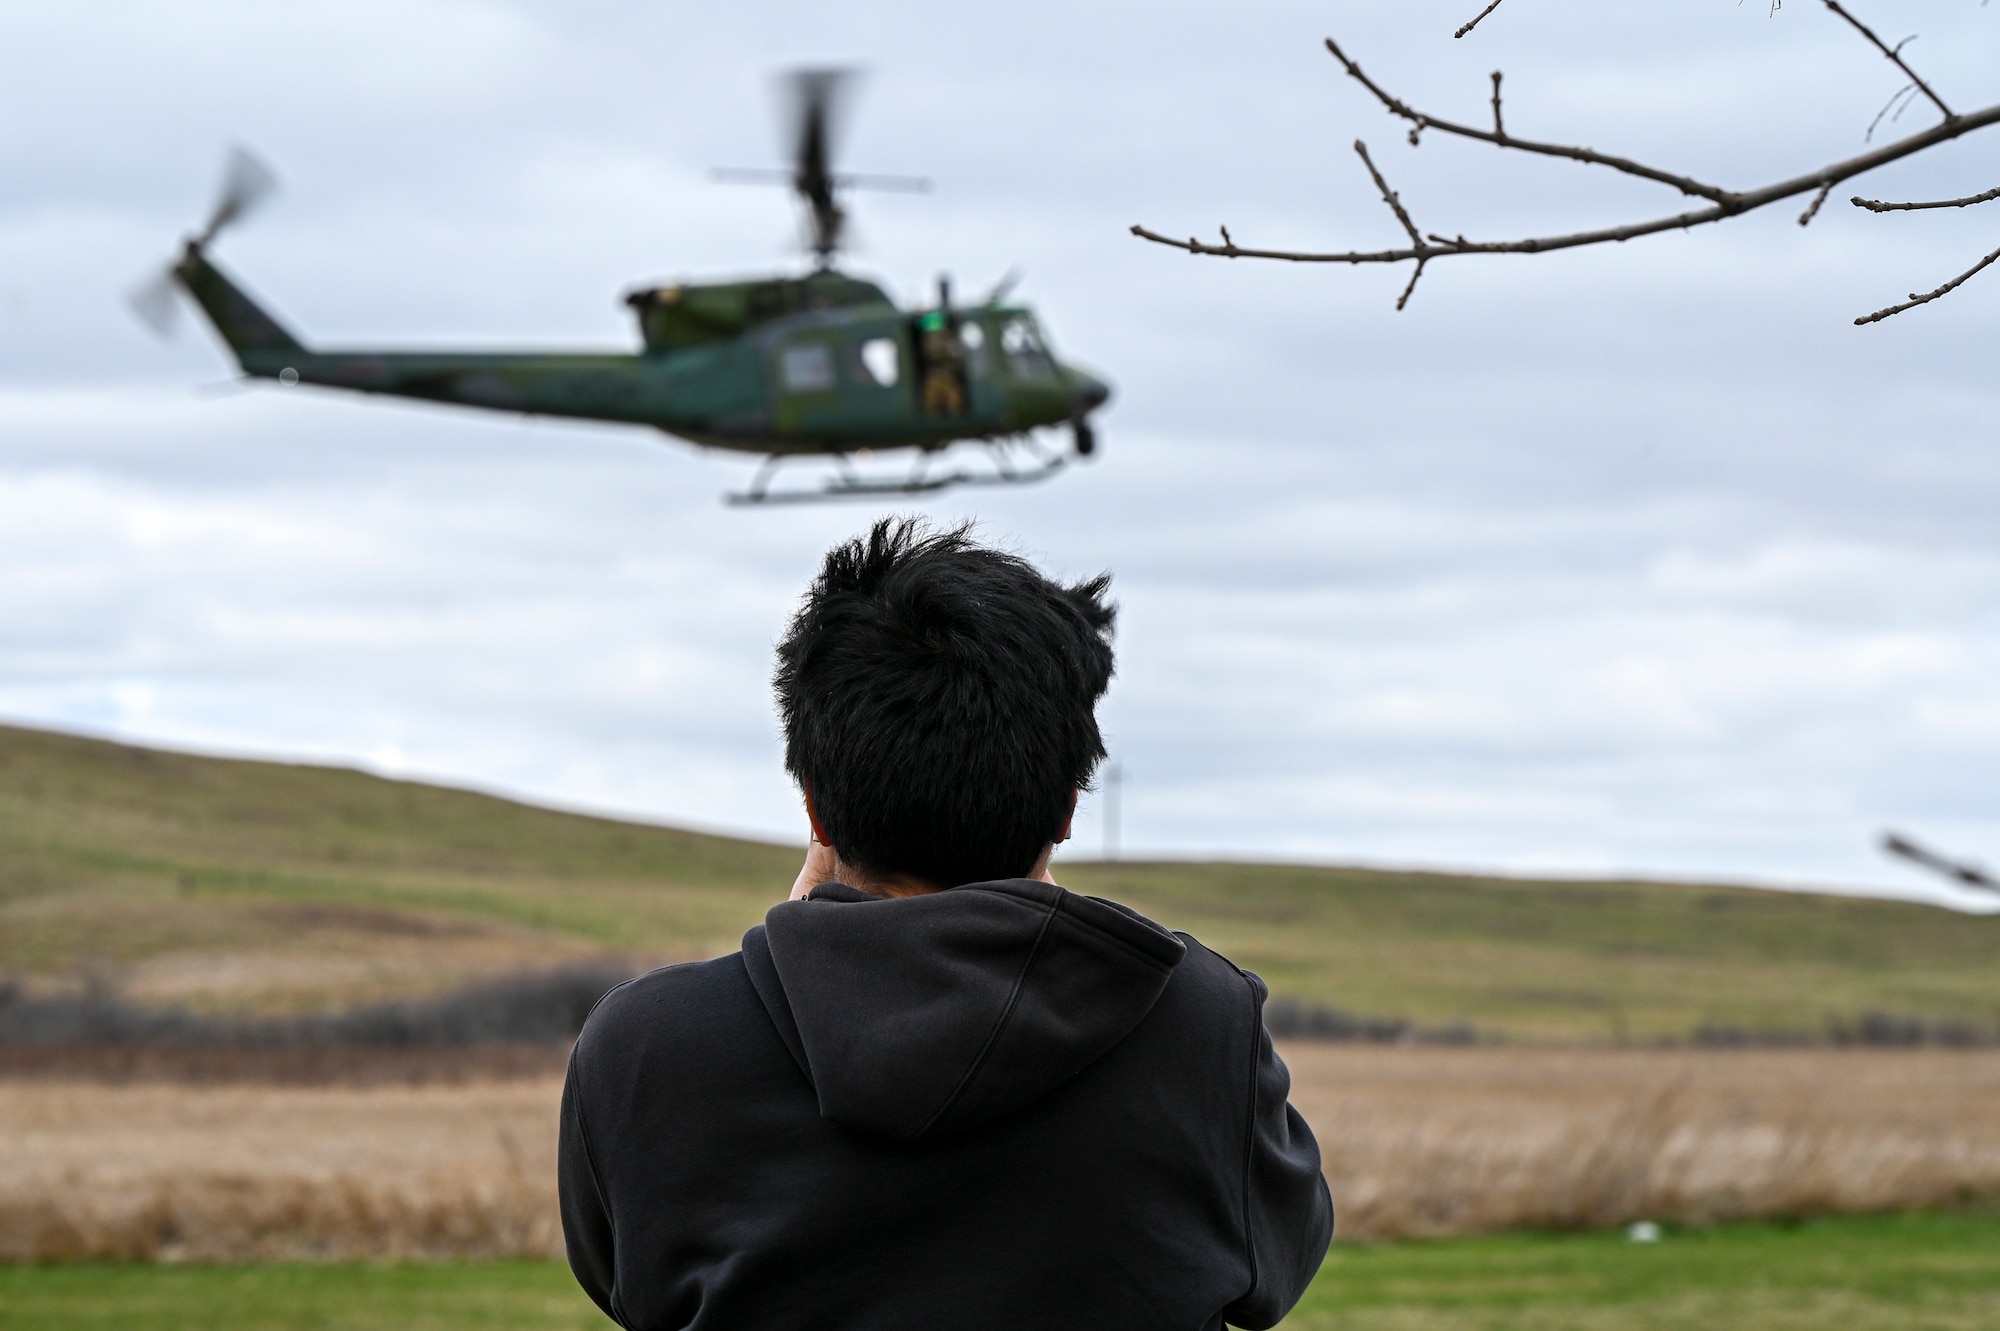 A student takes a photo of a helicopter landing.